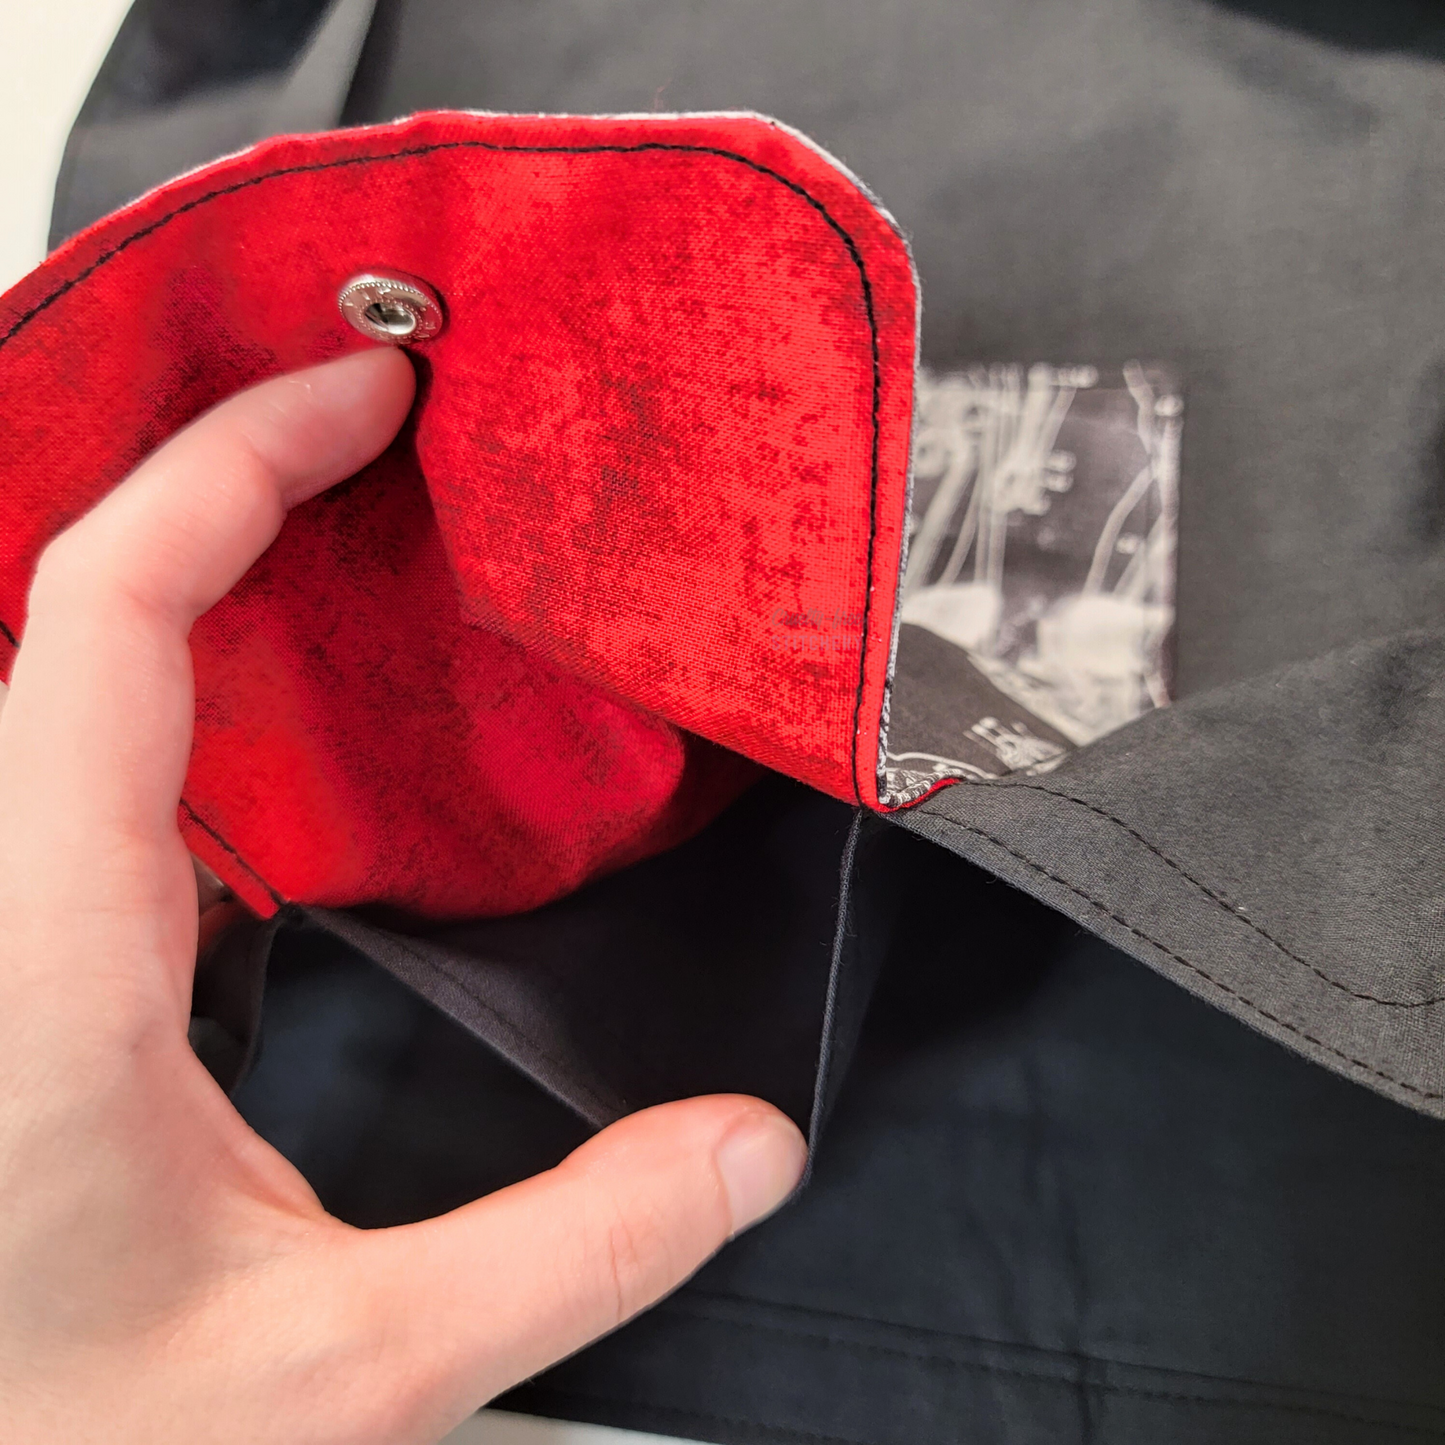 Inside of the foldable tote bag, a hidden pocket underneath the flap. This one has a bright distressed red inside the flap, but the color may vary.